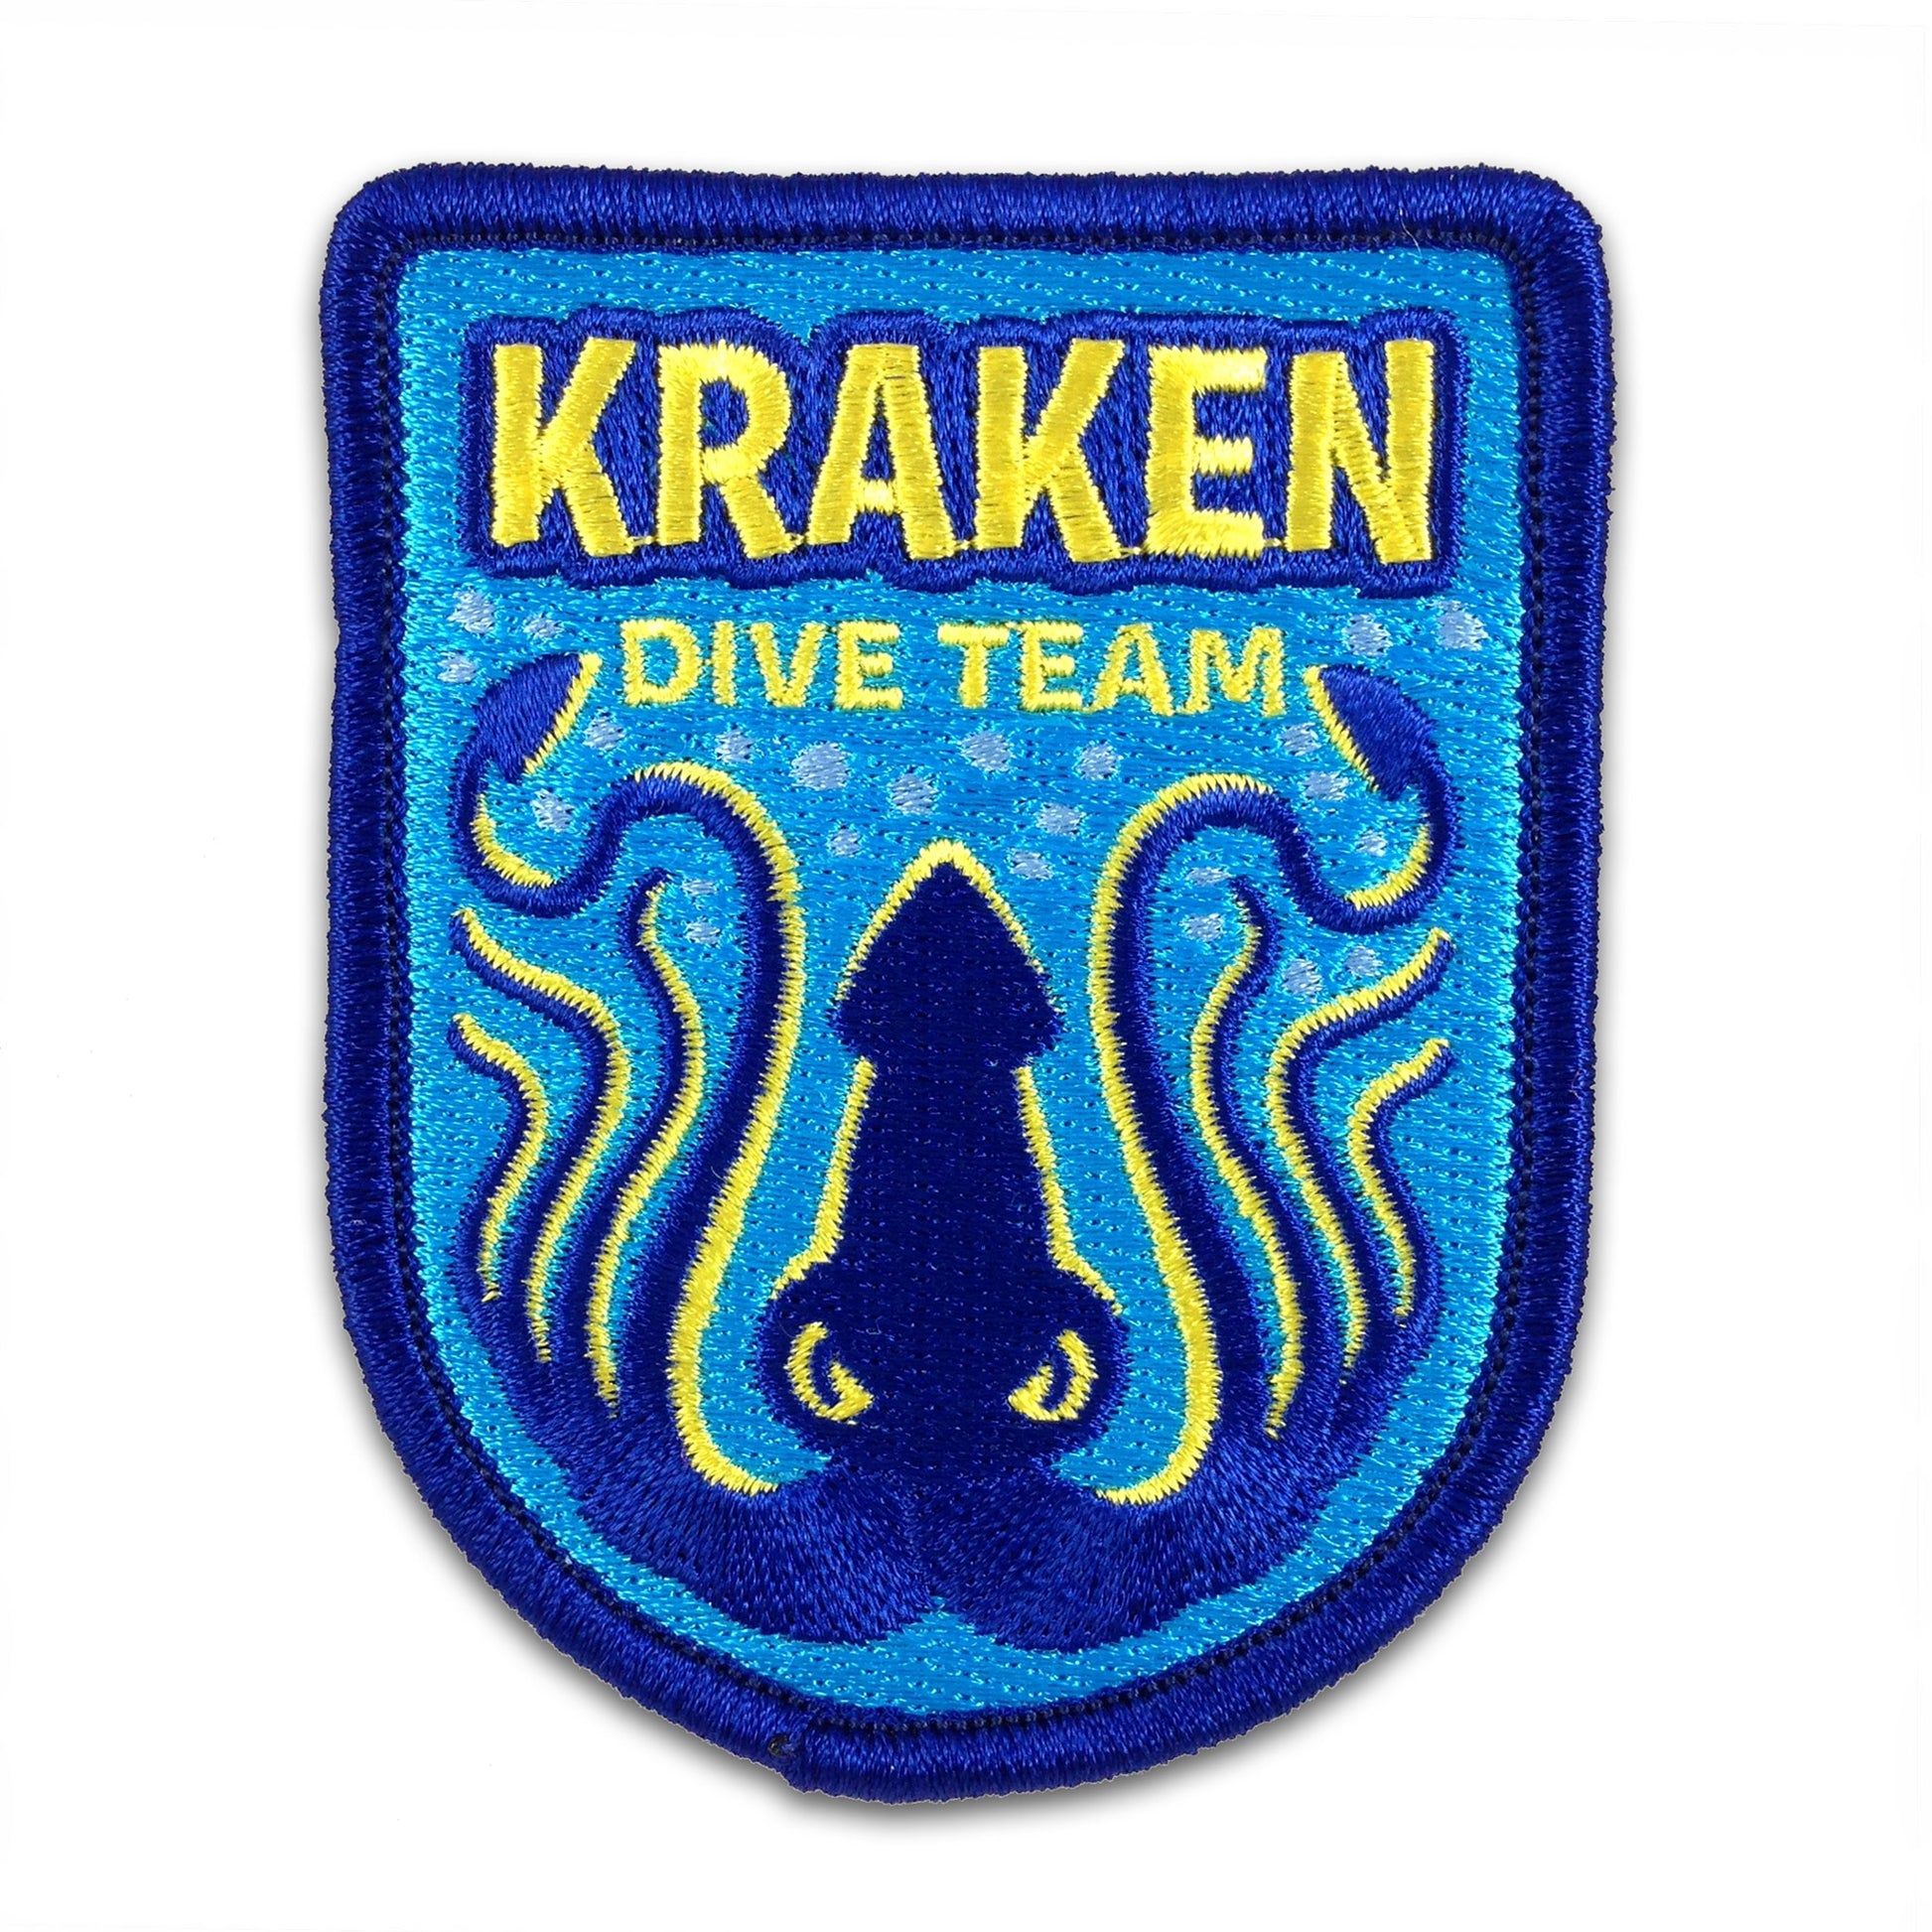 Kraken Dive Team cryptozoology military embroidered morale patch by Monsterologist